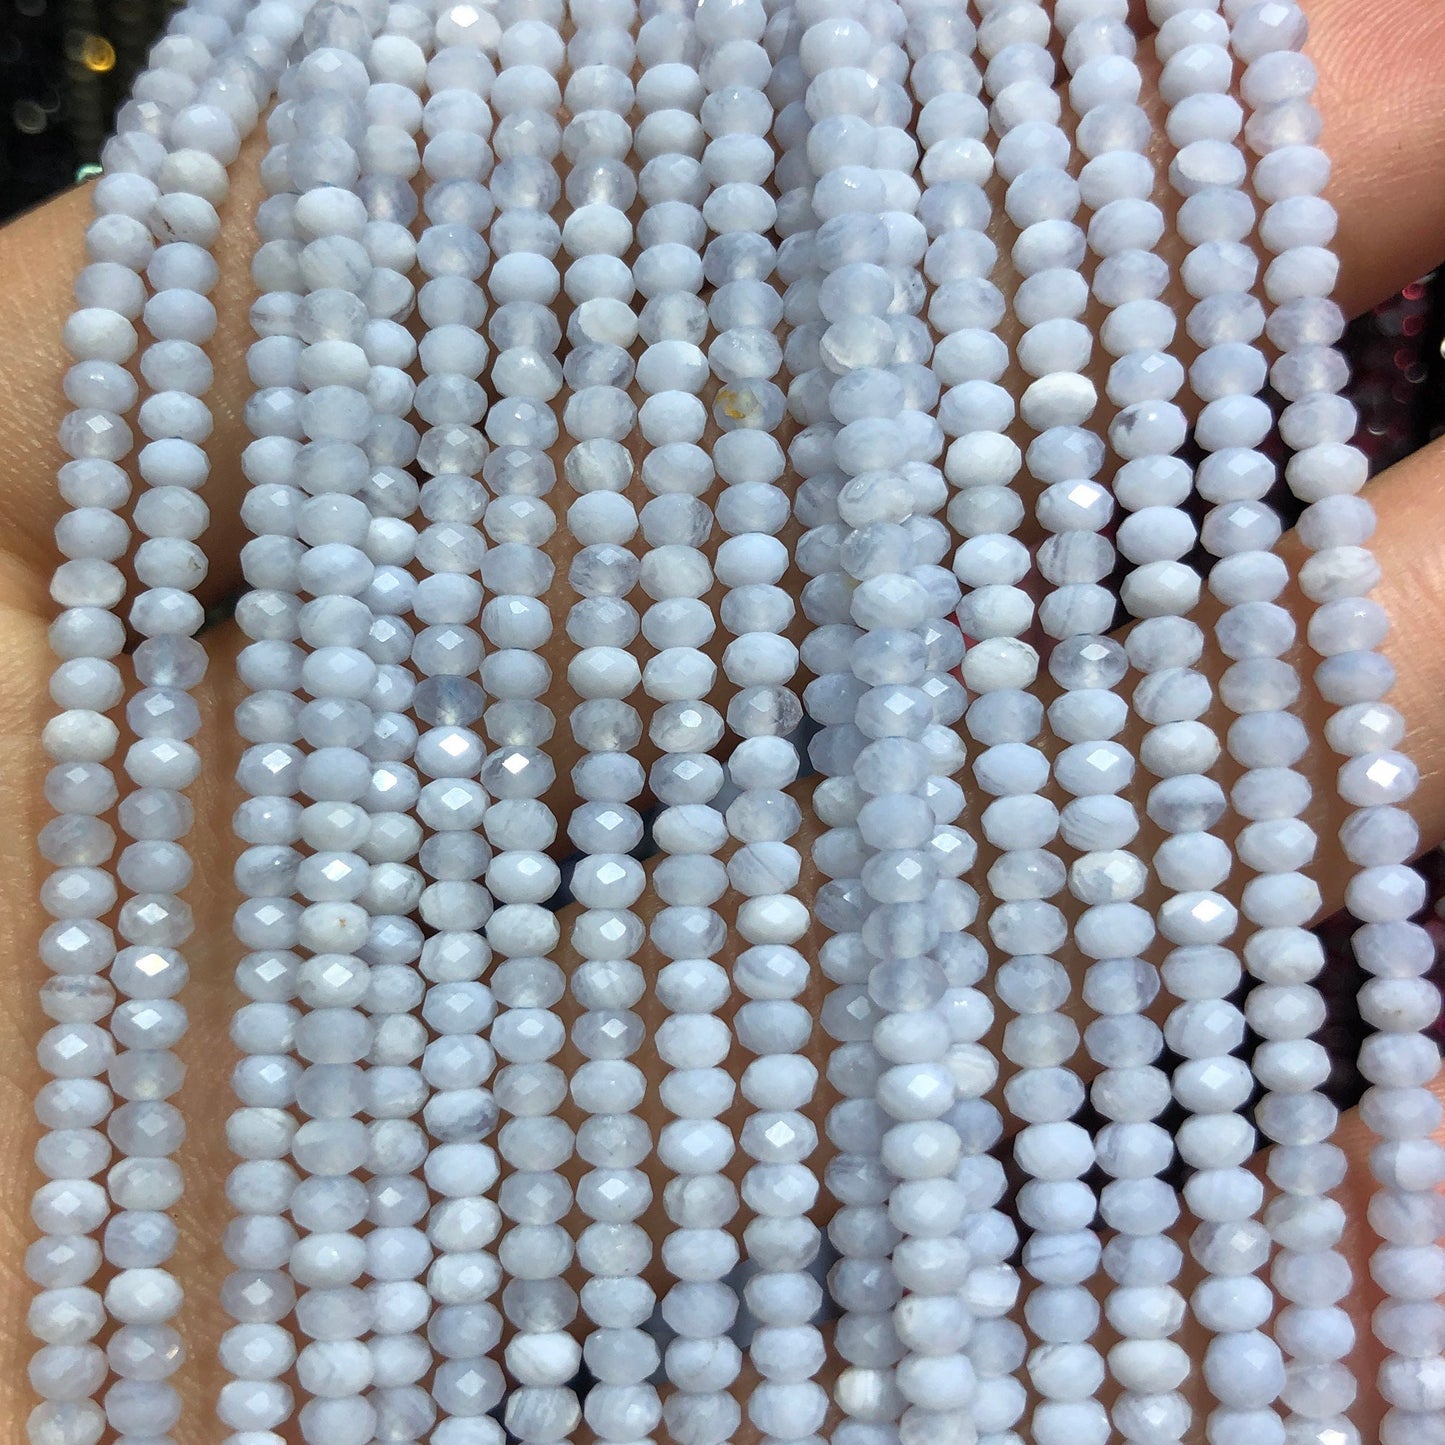 Blue Lace Agate Nice Cut Rondelle Faceted Beads 2x3mm 15''